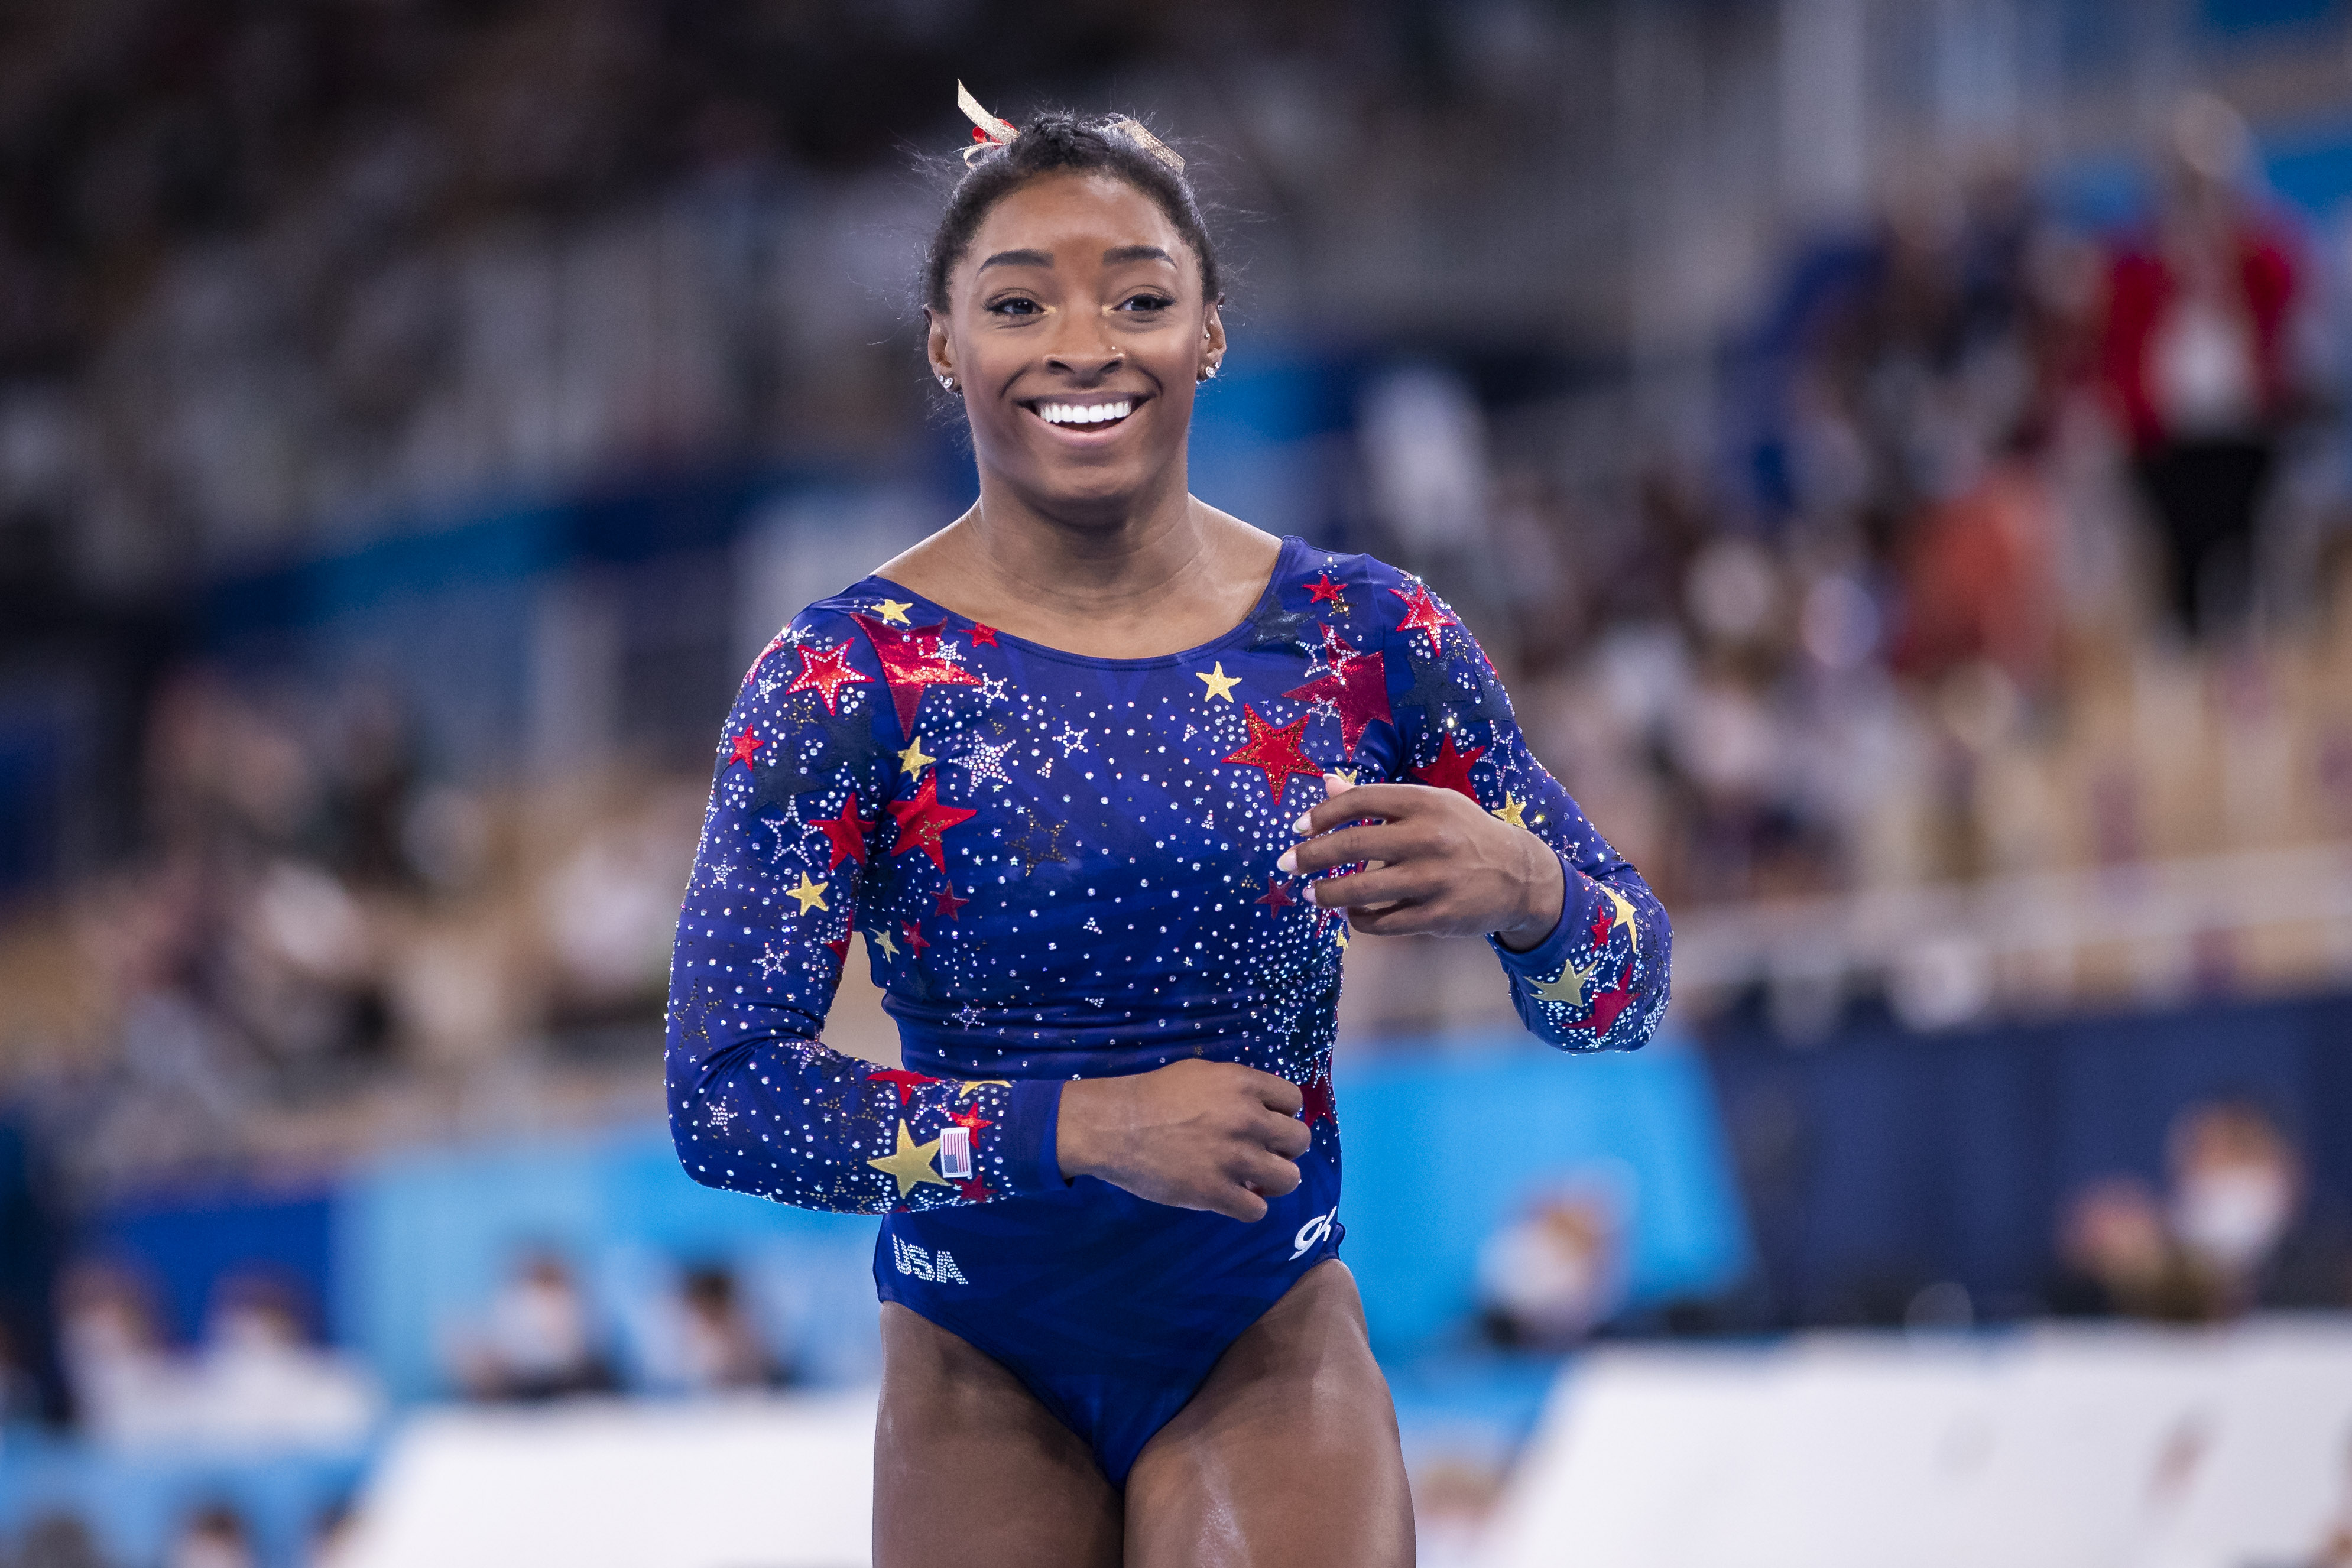 Simone Biles smiles during the qualification round of the women's gymnastics in Tokyo